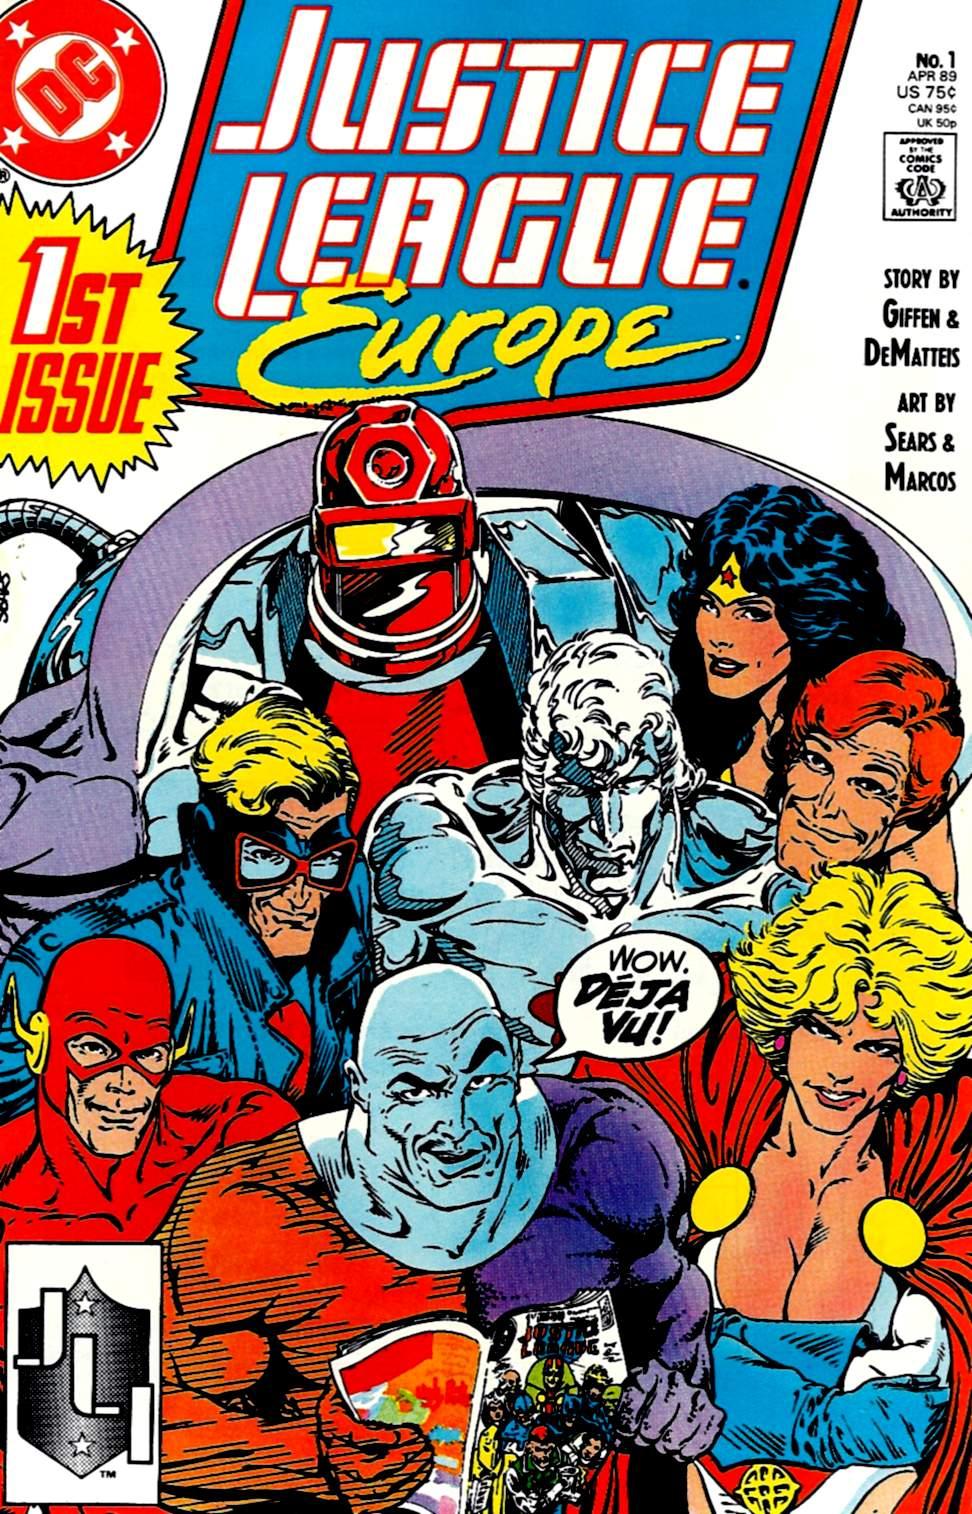 Justice-League-Europe-1-1989-Cover.jpg